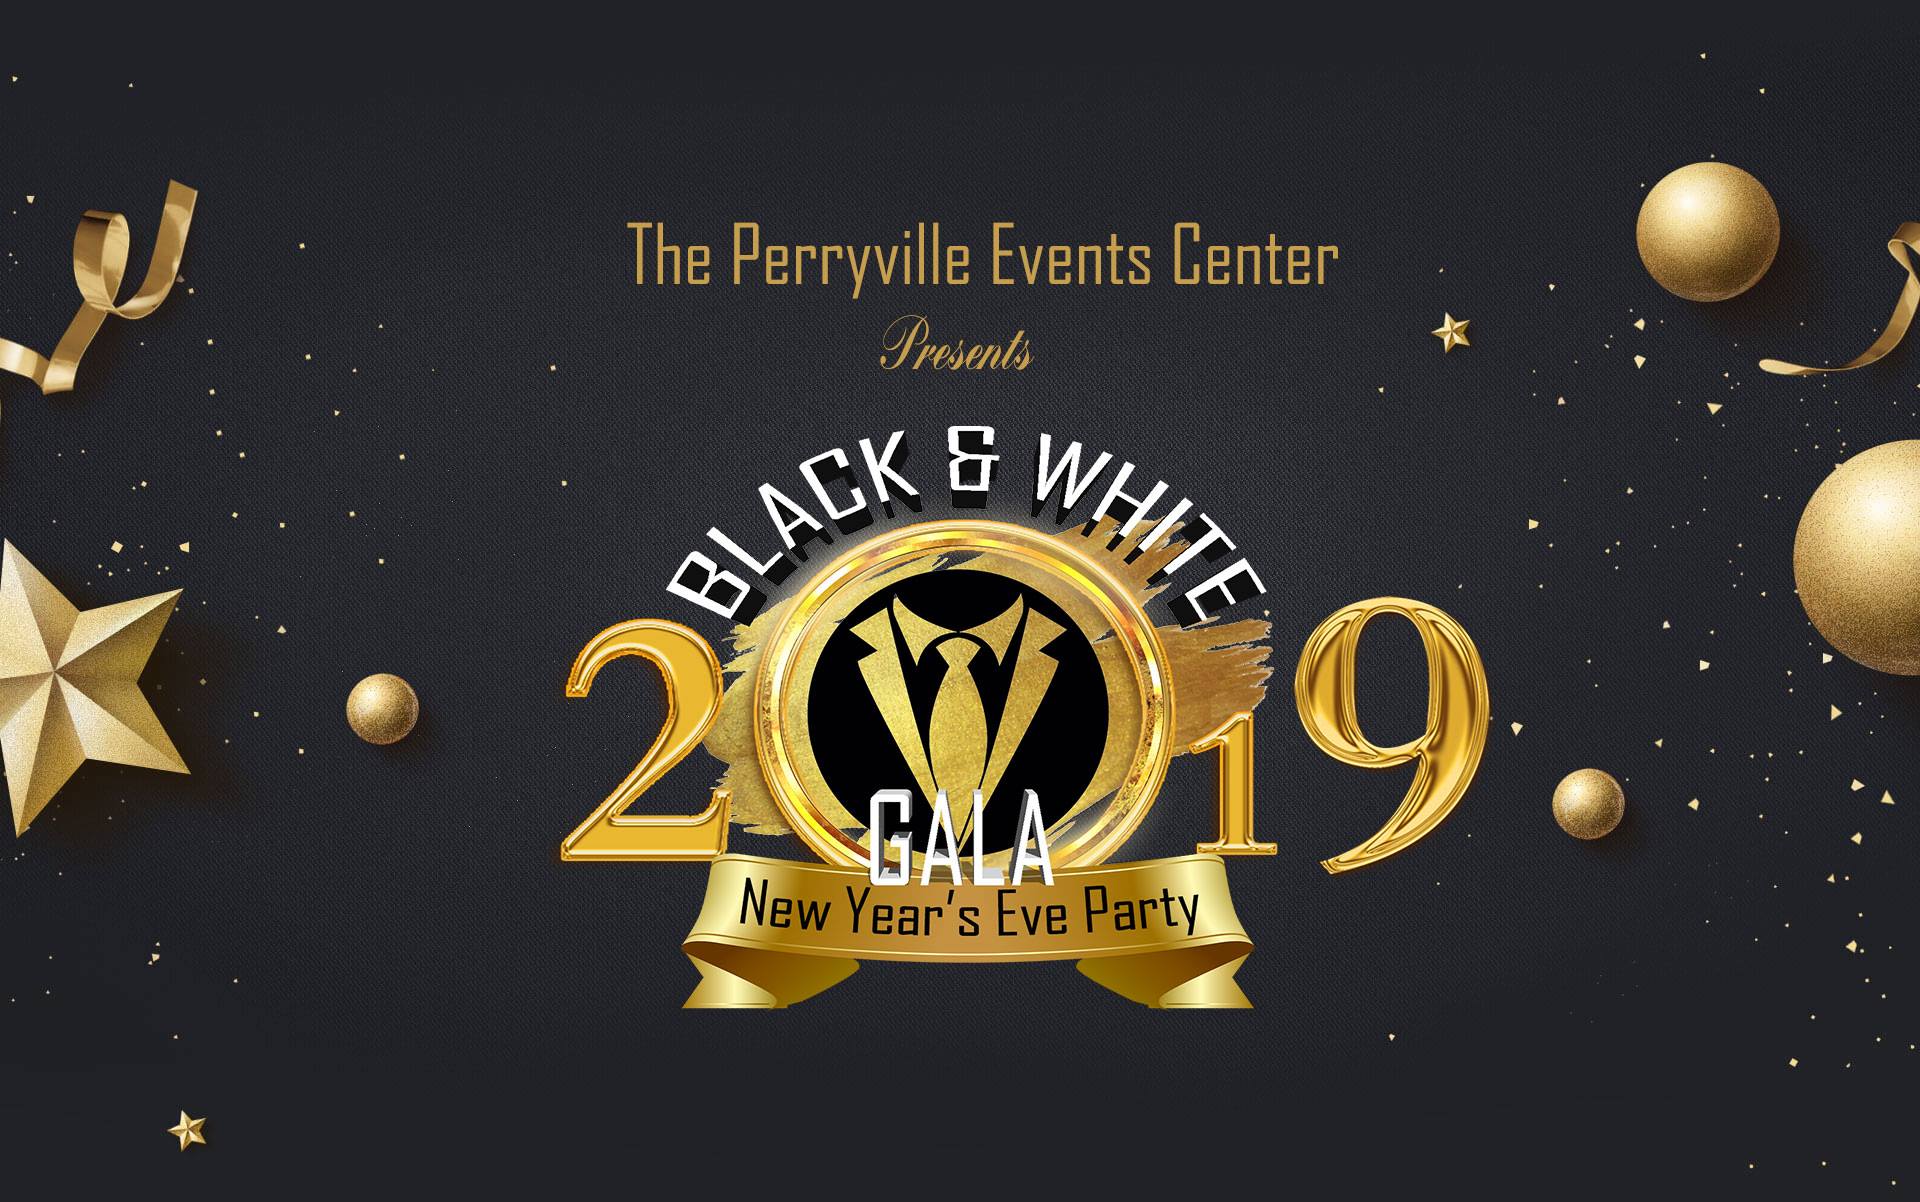 Perryville Entertainment Center New Years Eve Party